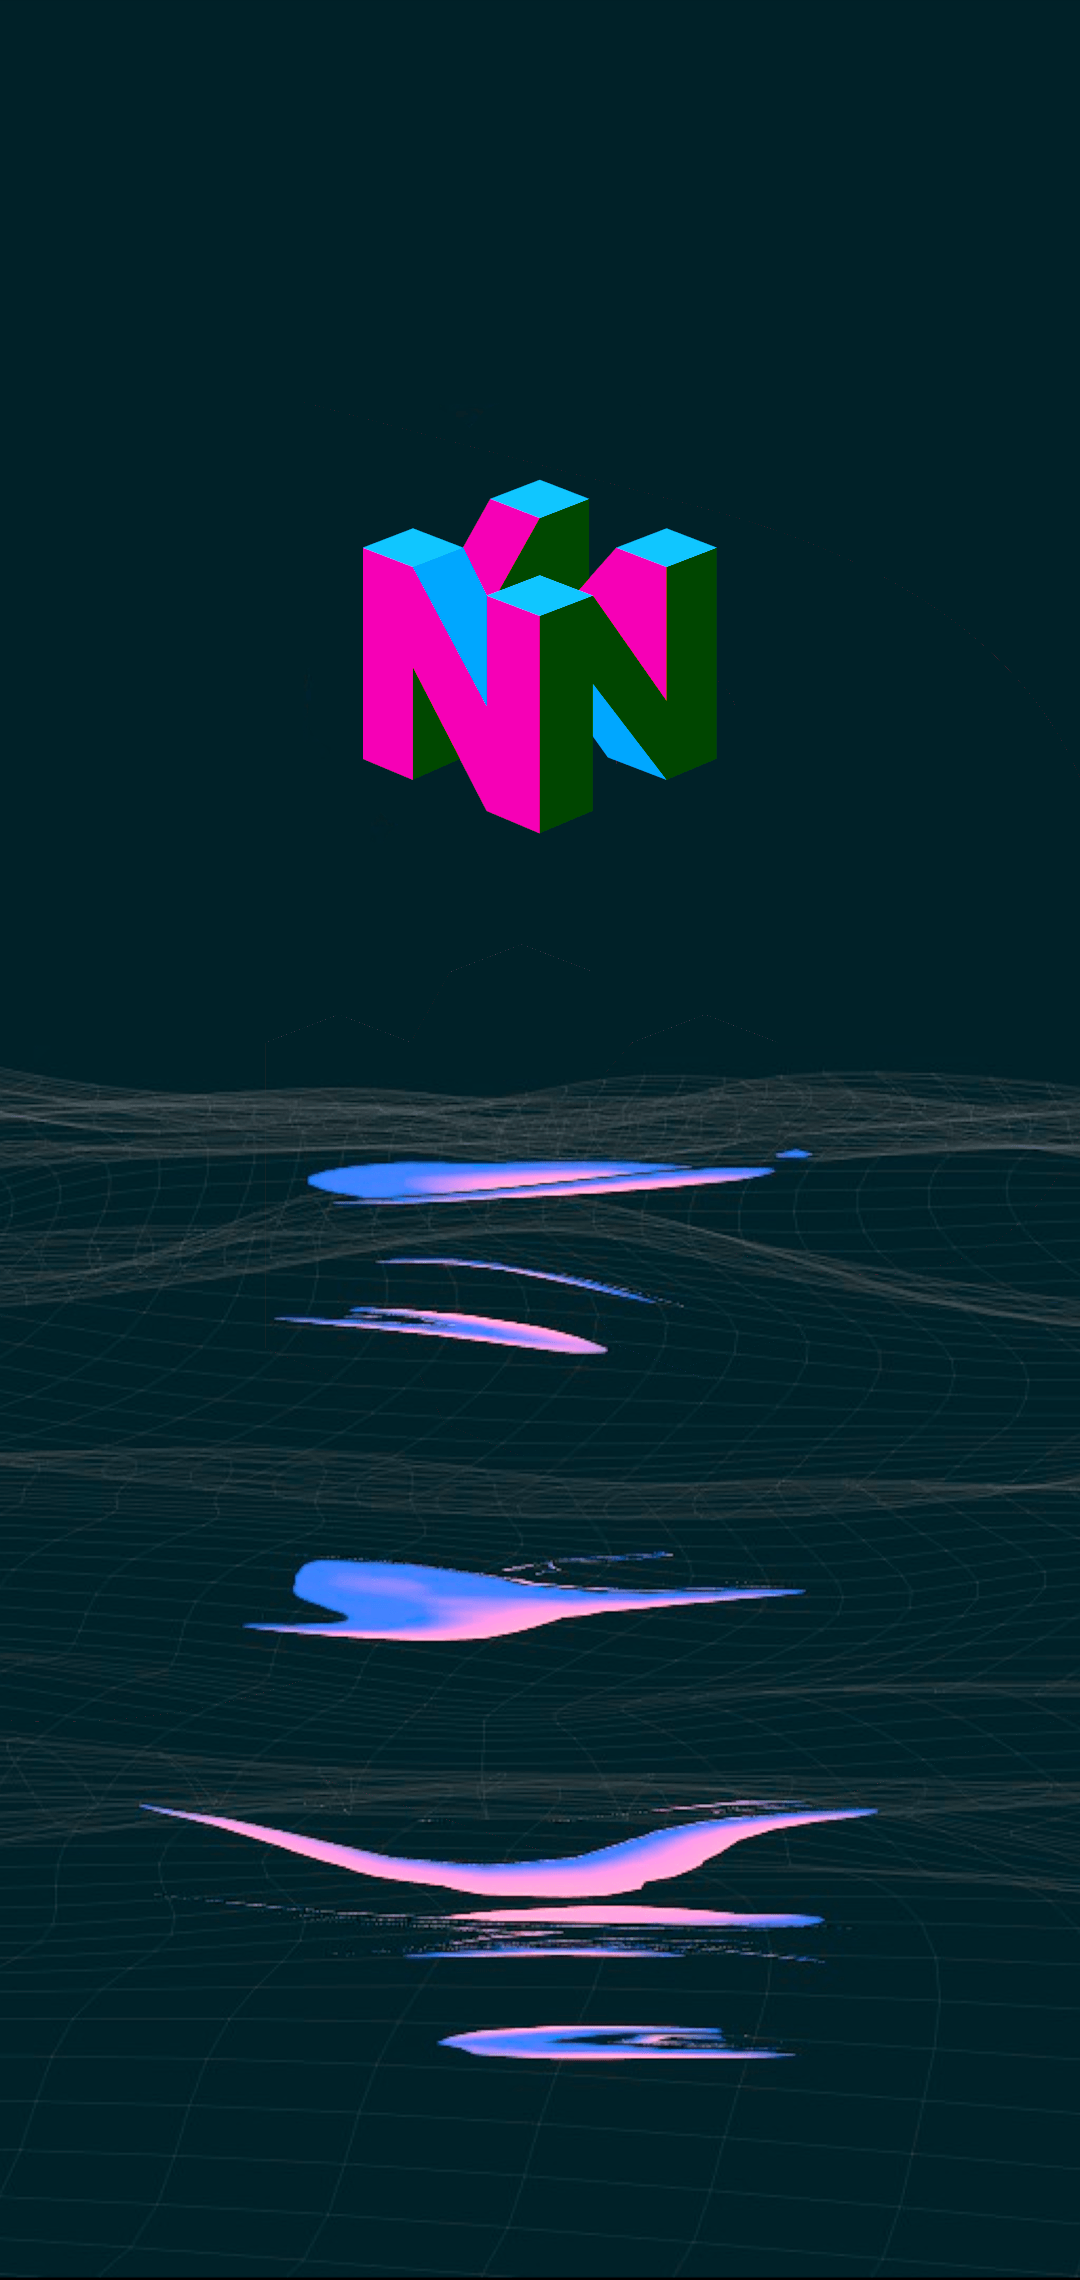 Vaporwave Sythwave You Name It Wallpaper For OnePlus 6. Resolution